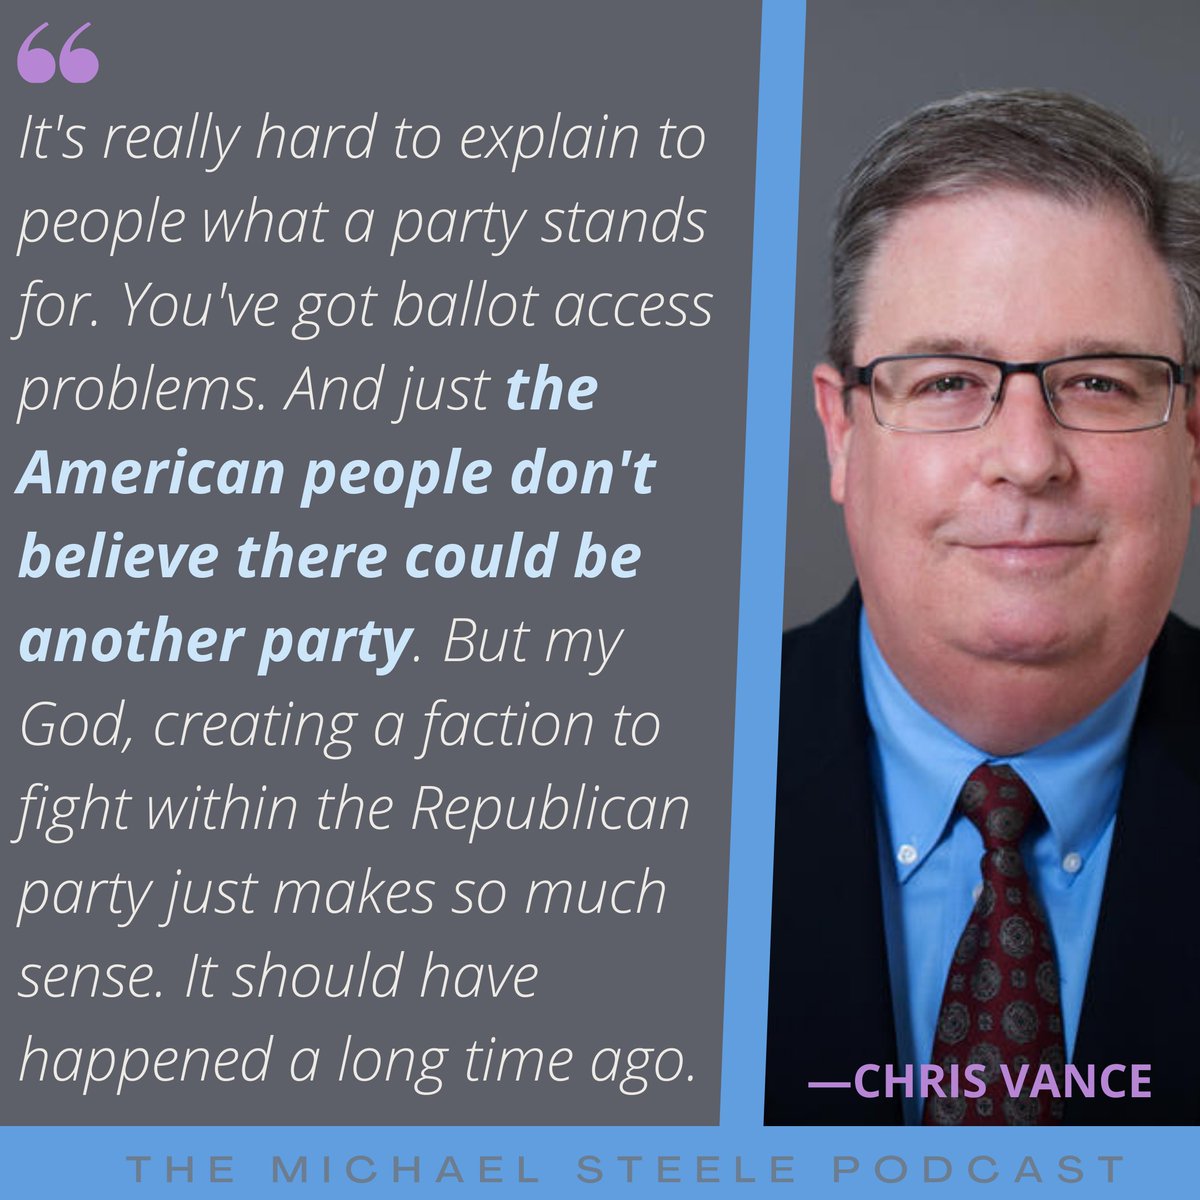 .@MichaelSteele speaks w/ @Chrisvance123 about his book, 'The Fall of the Shining City: What Happened to the Republican Party. Why it Happened. And What Must Happen Now to Save American Democracy.” 🎧Listen: pod.fo/e/232822 📺Watch: youtu.be/8BM-3ZEgZ1I